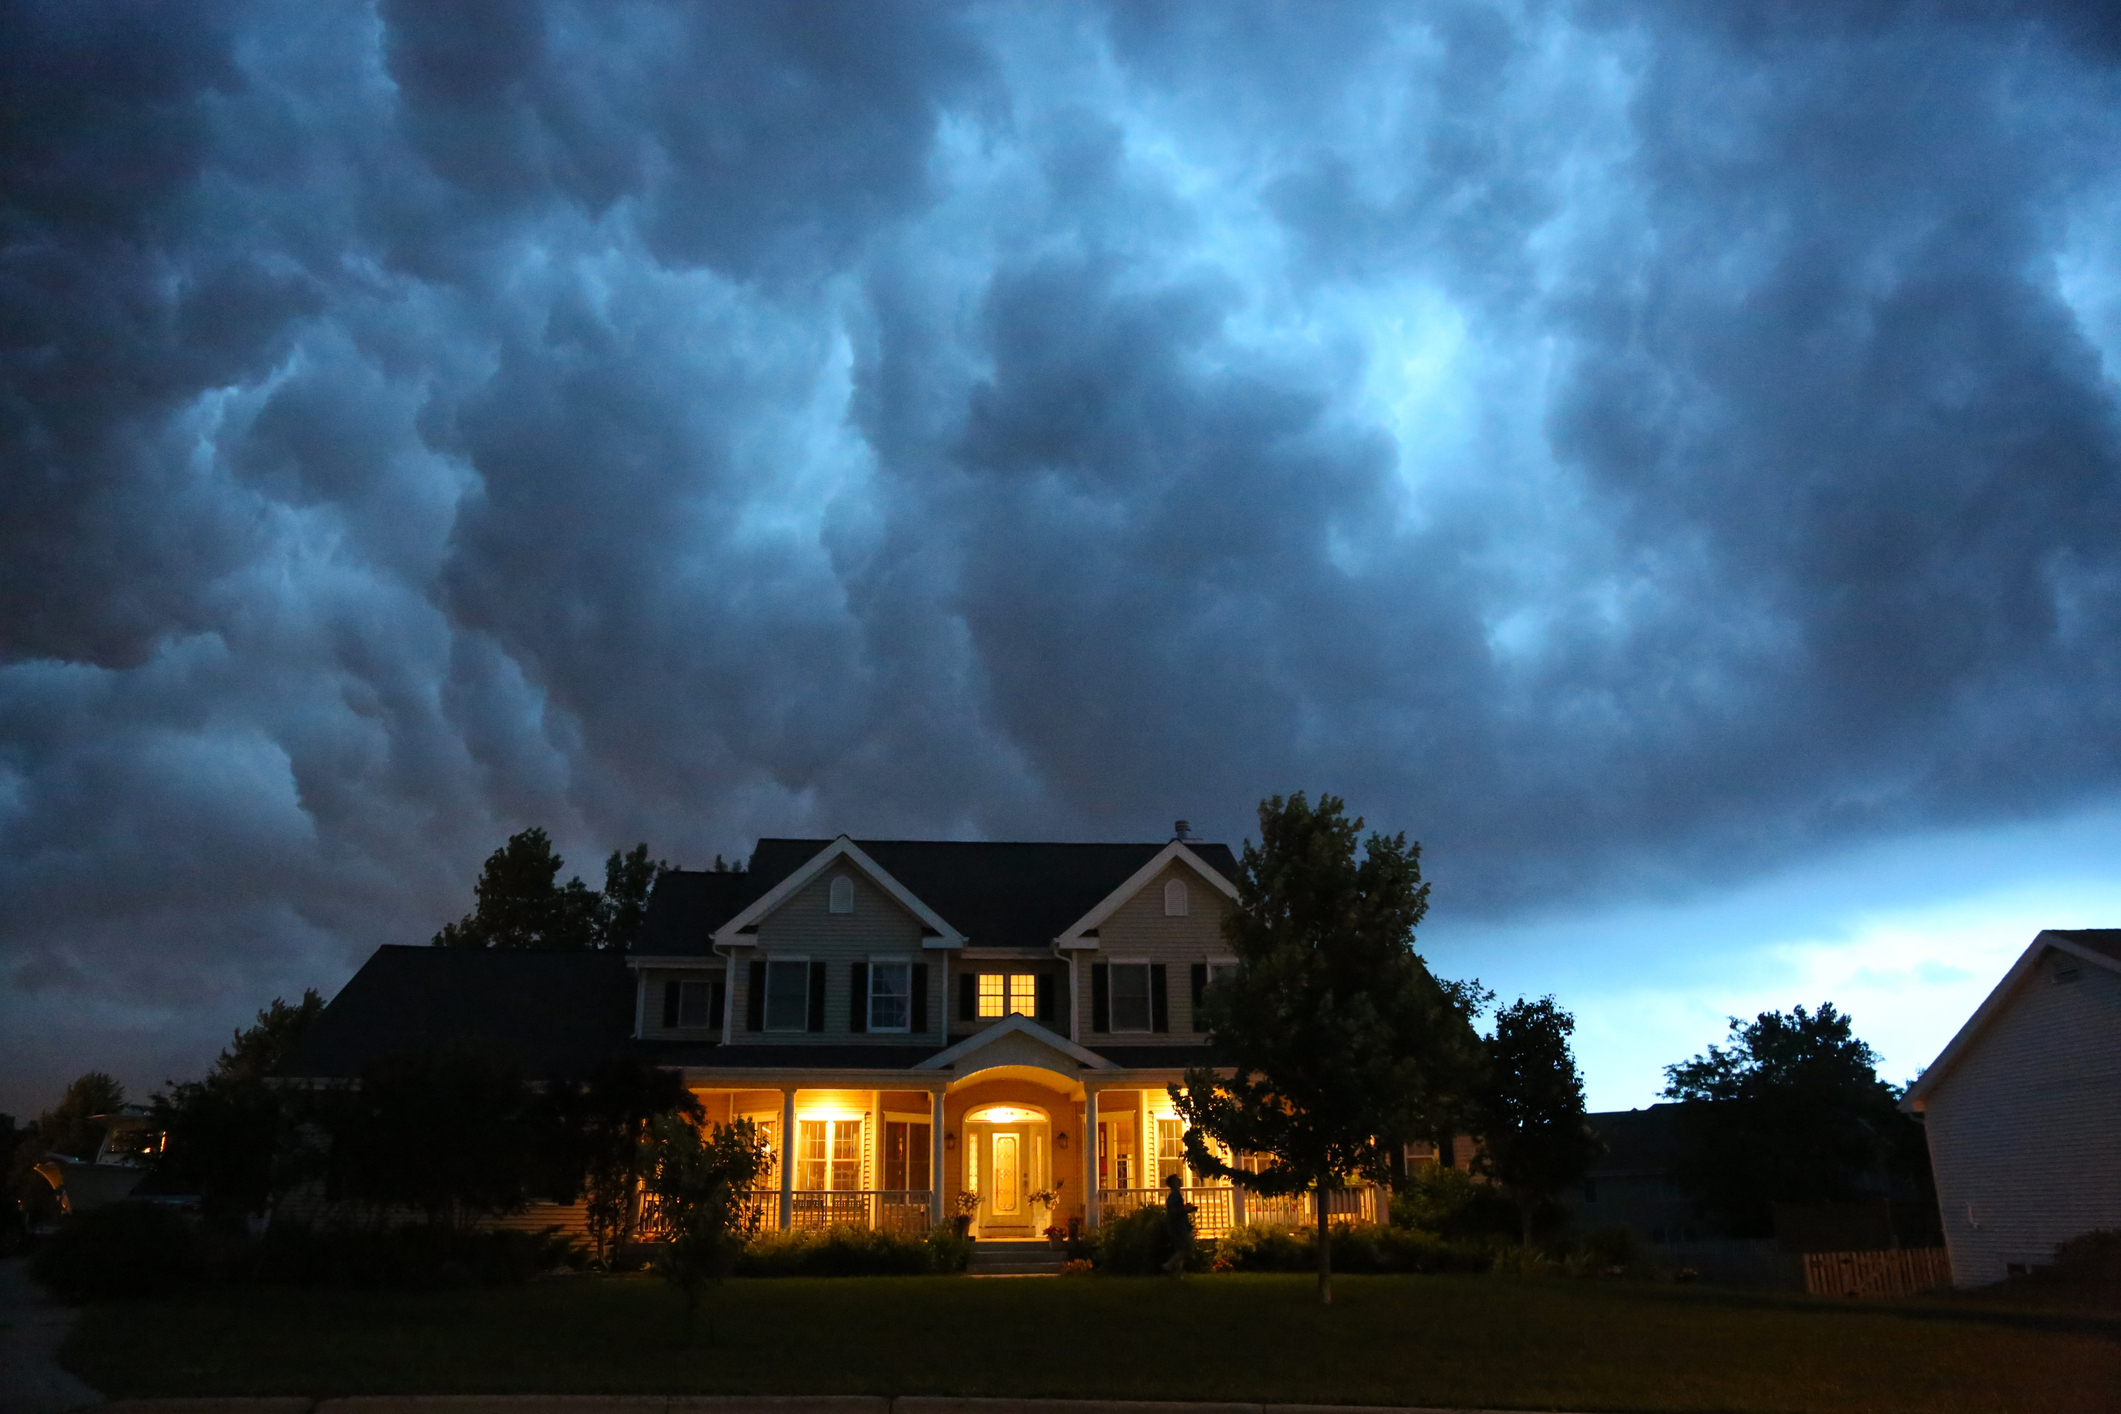 Dramatic storm clouds gather above a suburban house at dusk